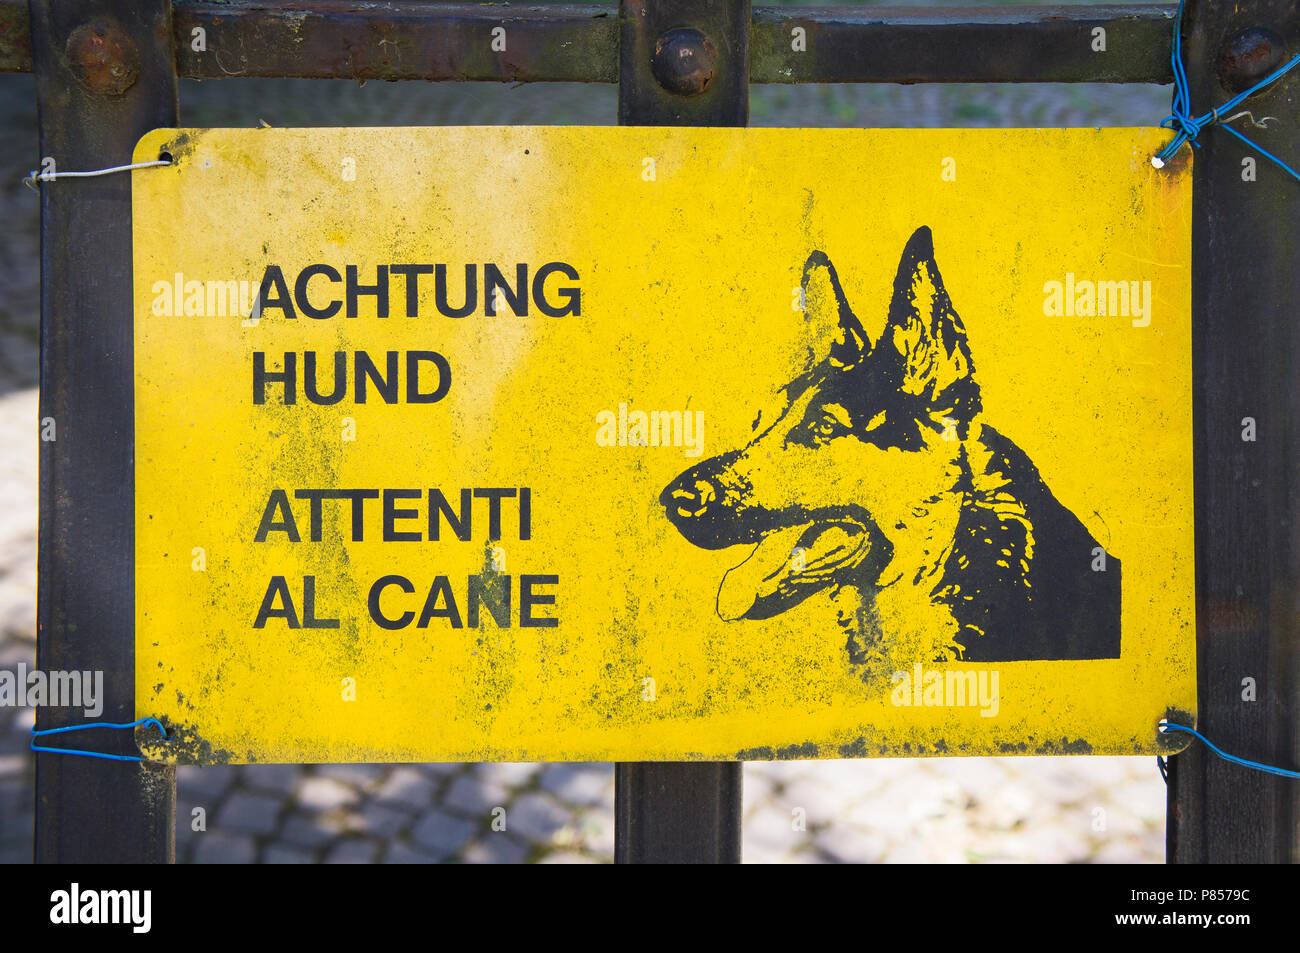 ACHTUNG HUND, ATTENTI AL CANE, beware of dog sign, plaque, warning Stock Photo